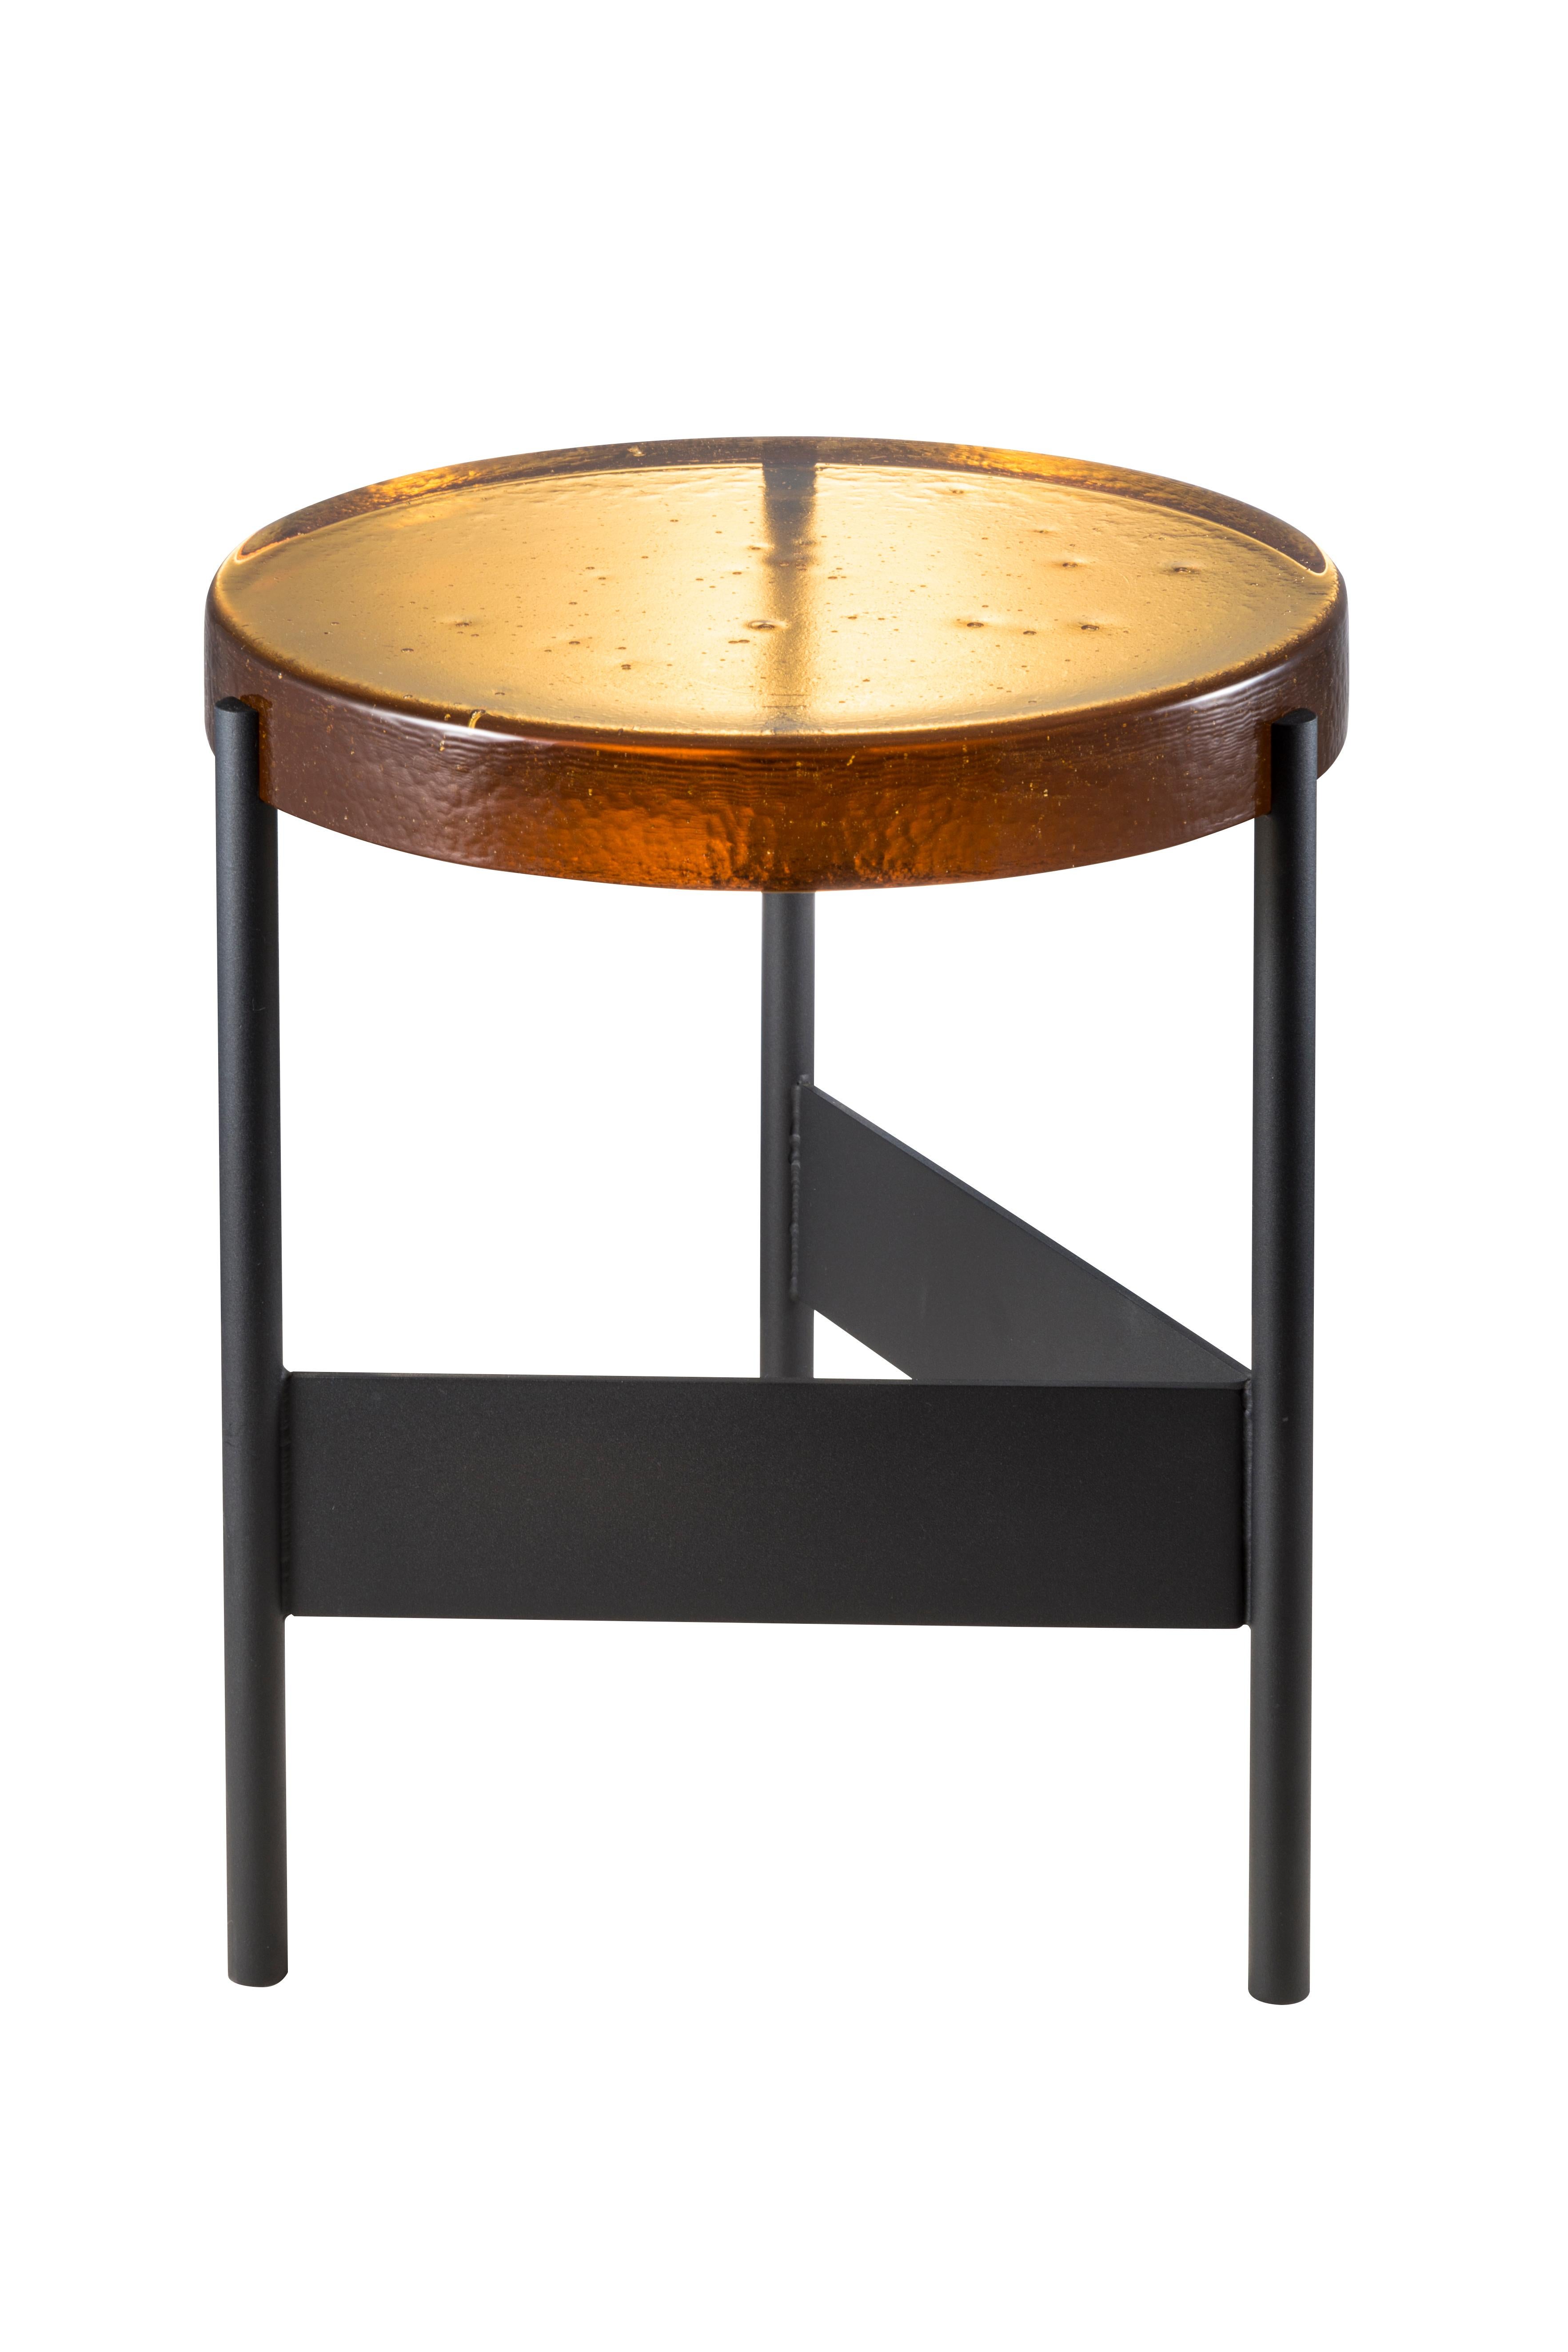 Alwa two amber black side table by Pulpo
Dimensions: D38 x H44 cm
Materials: casted glass; powder coated steel 

Also available in different finishes. 

Normally, glass is regarded as being lightweight with sharp edges. In contrast, Sebastian